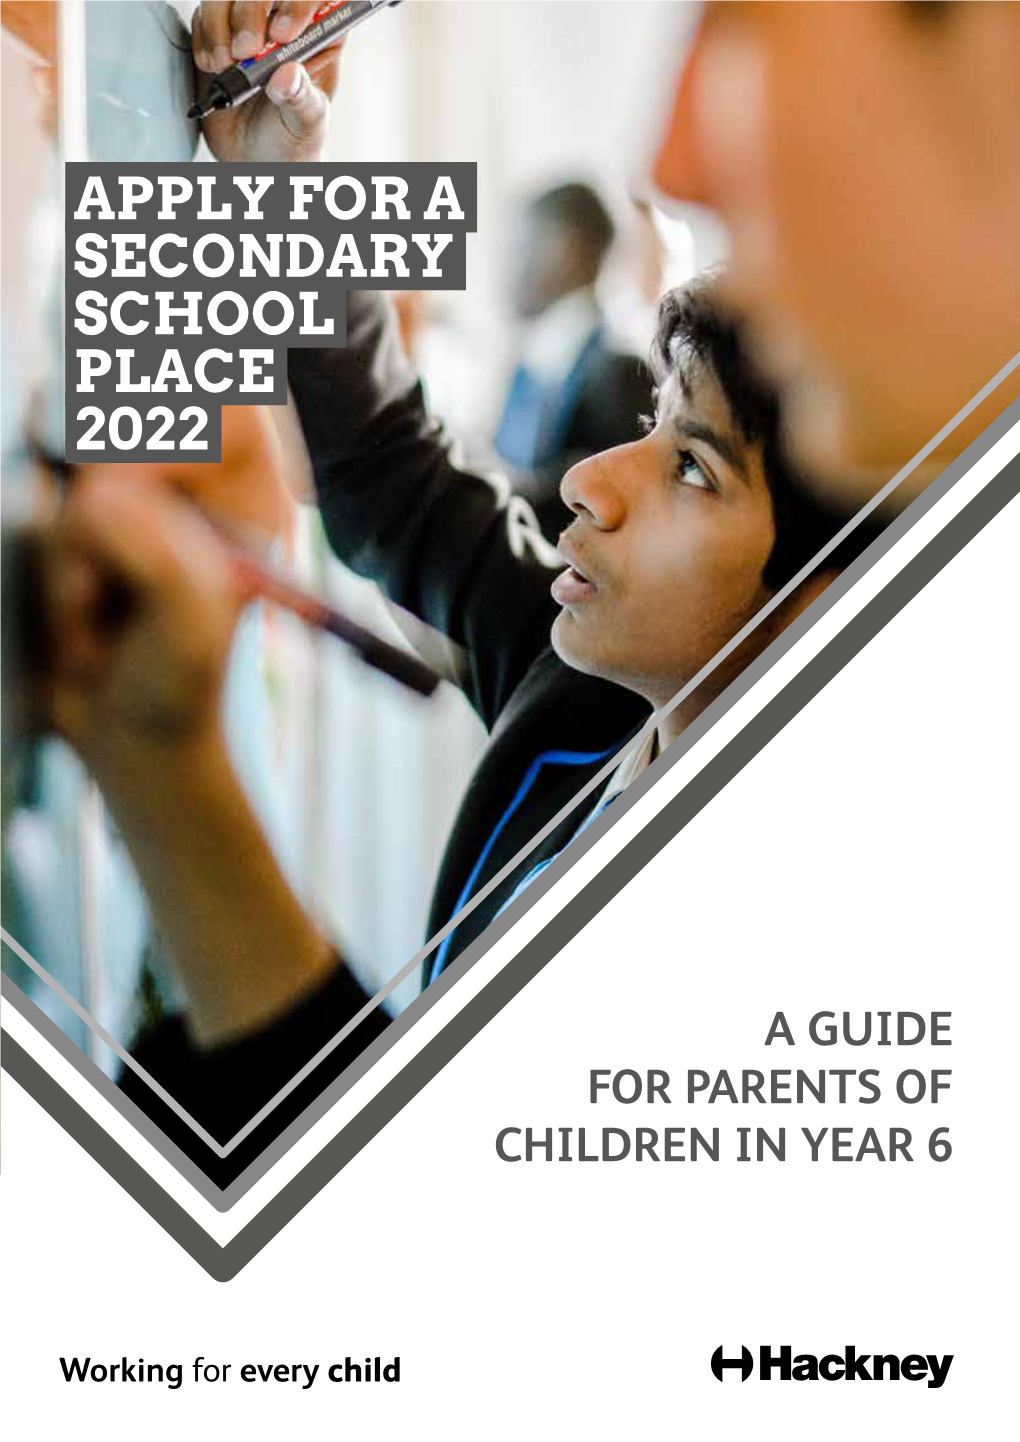 Apply for a Secondary School Place 2022